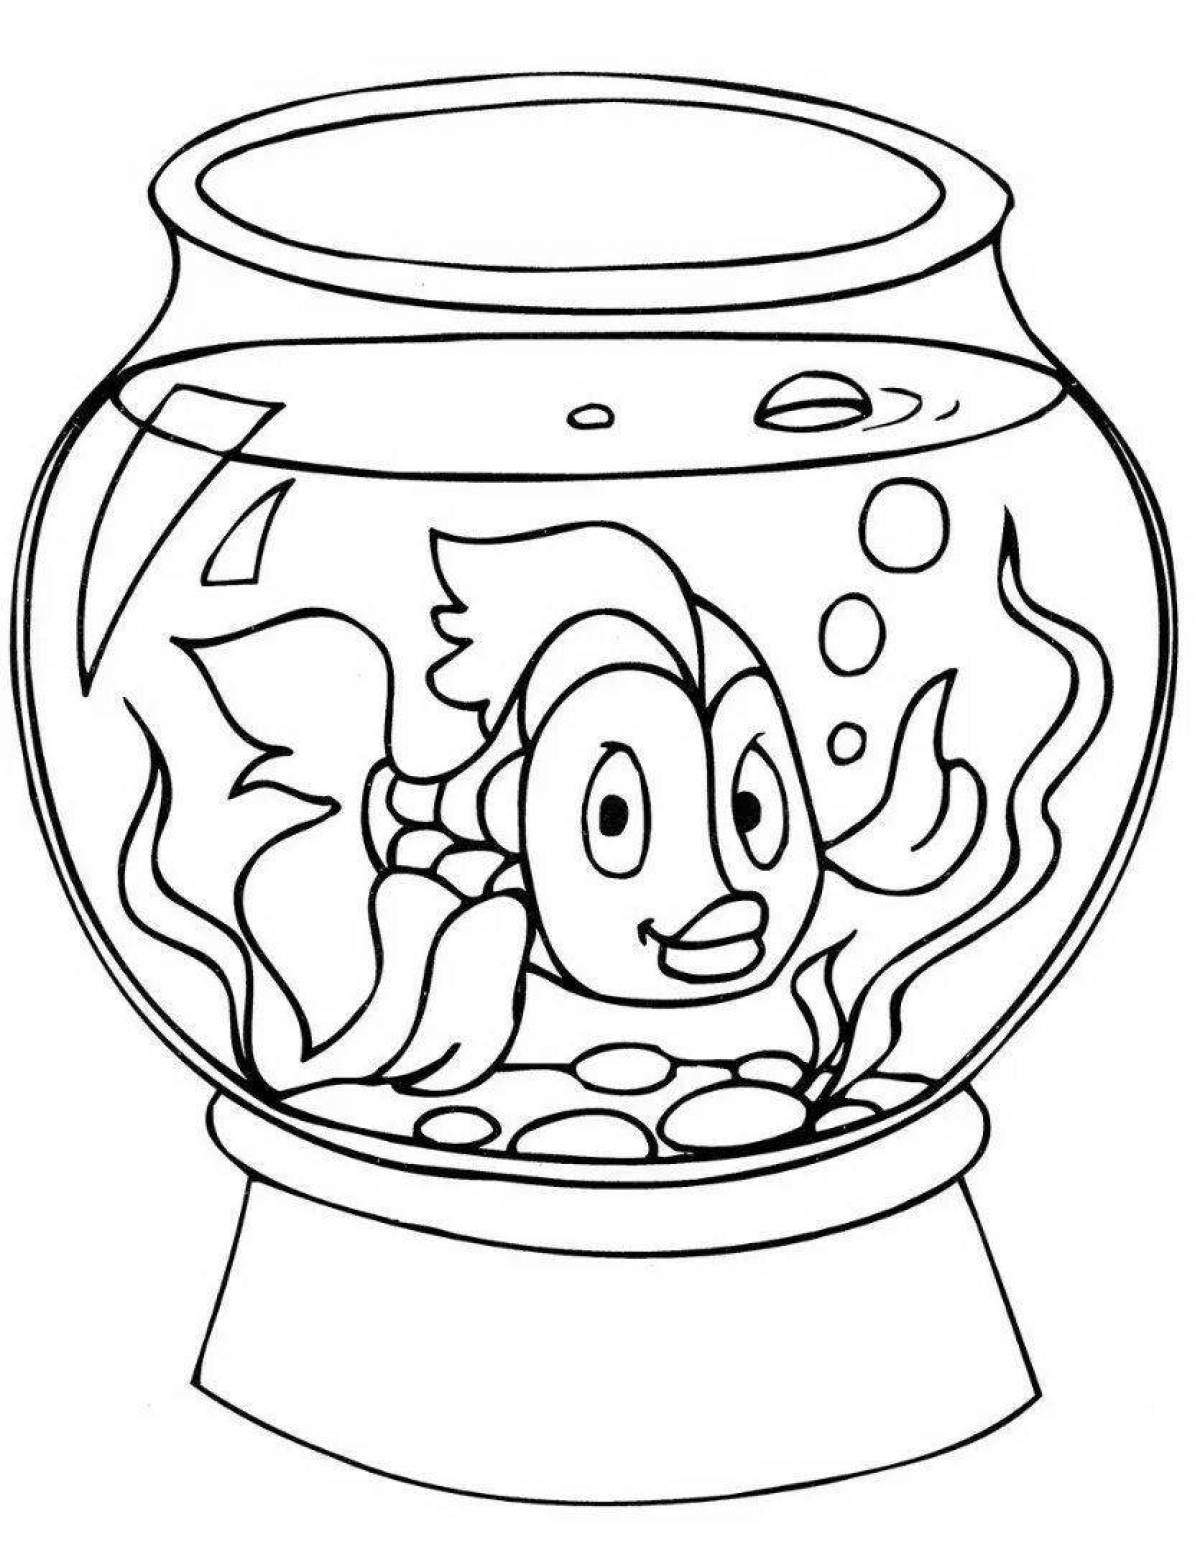 A fun aquarium coloring book for 3-4 year olds